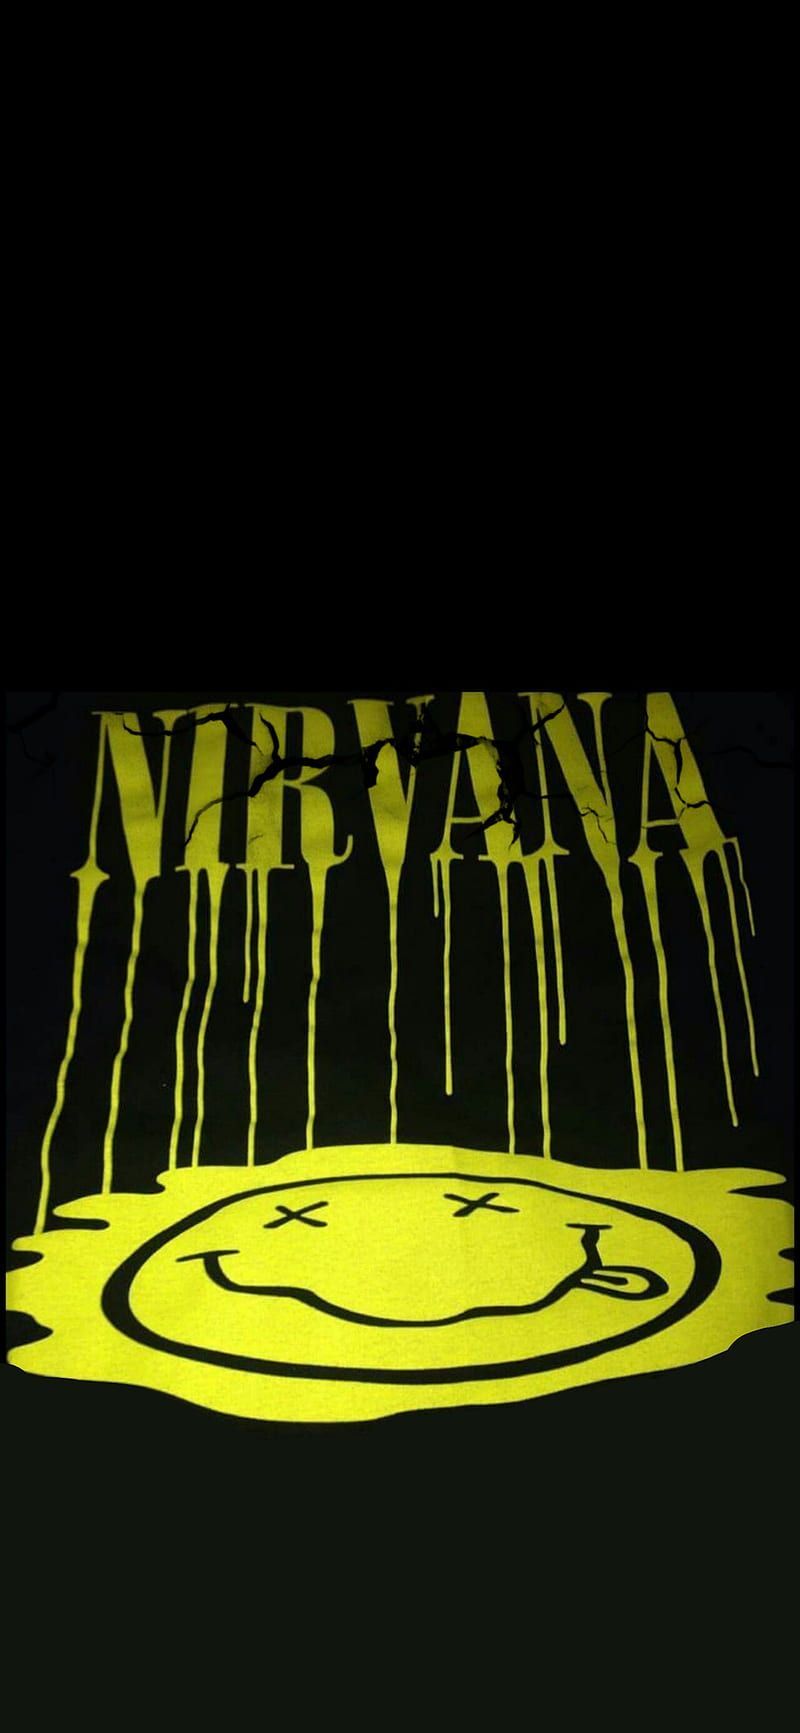 Nirvana wallpaper for iPhone and Android! (free download) - Nirvana